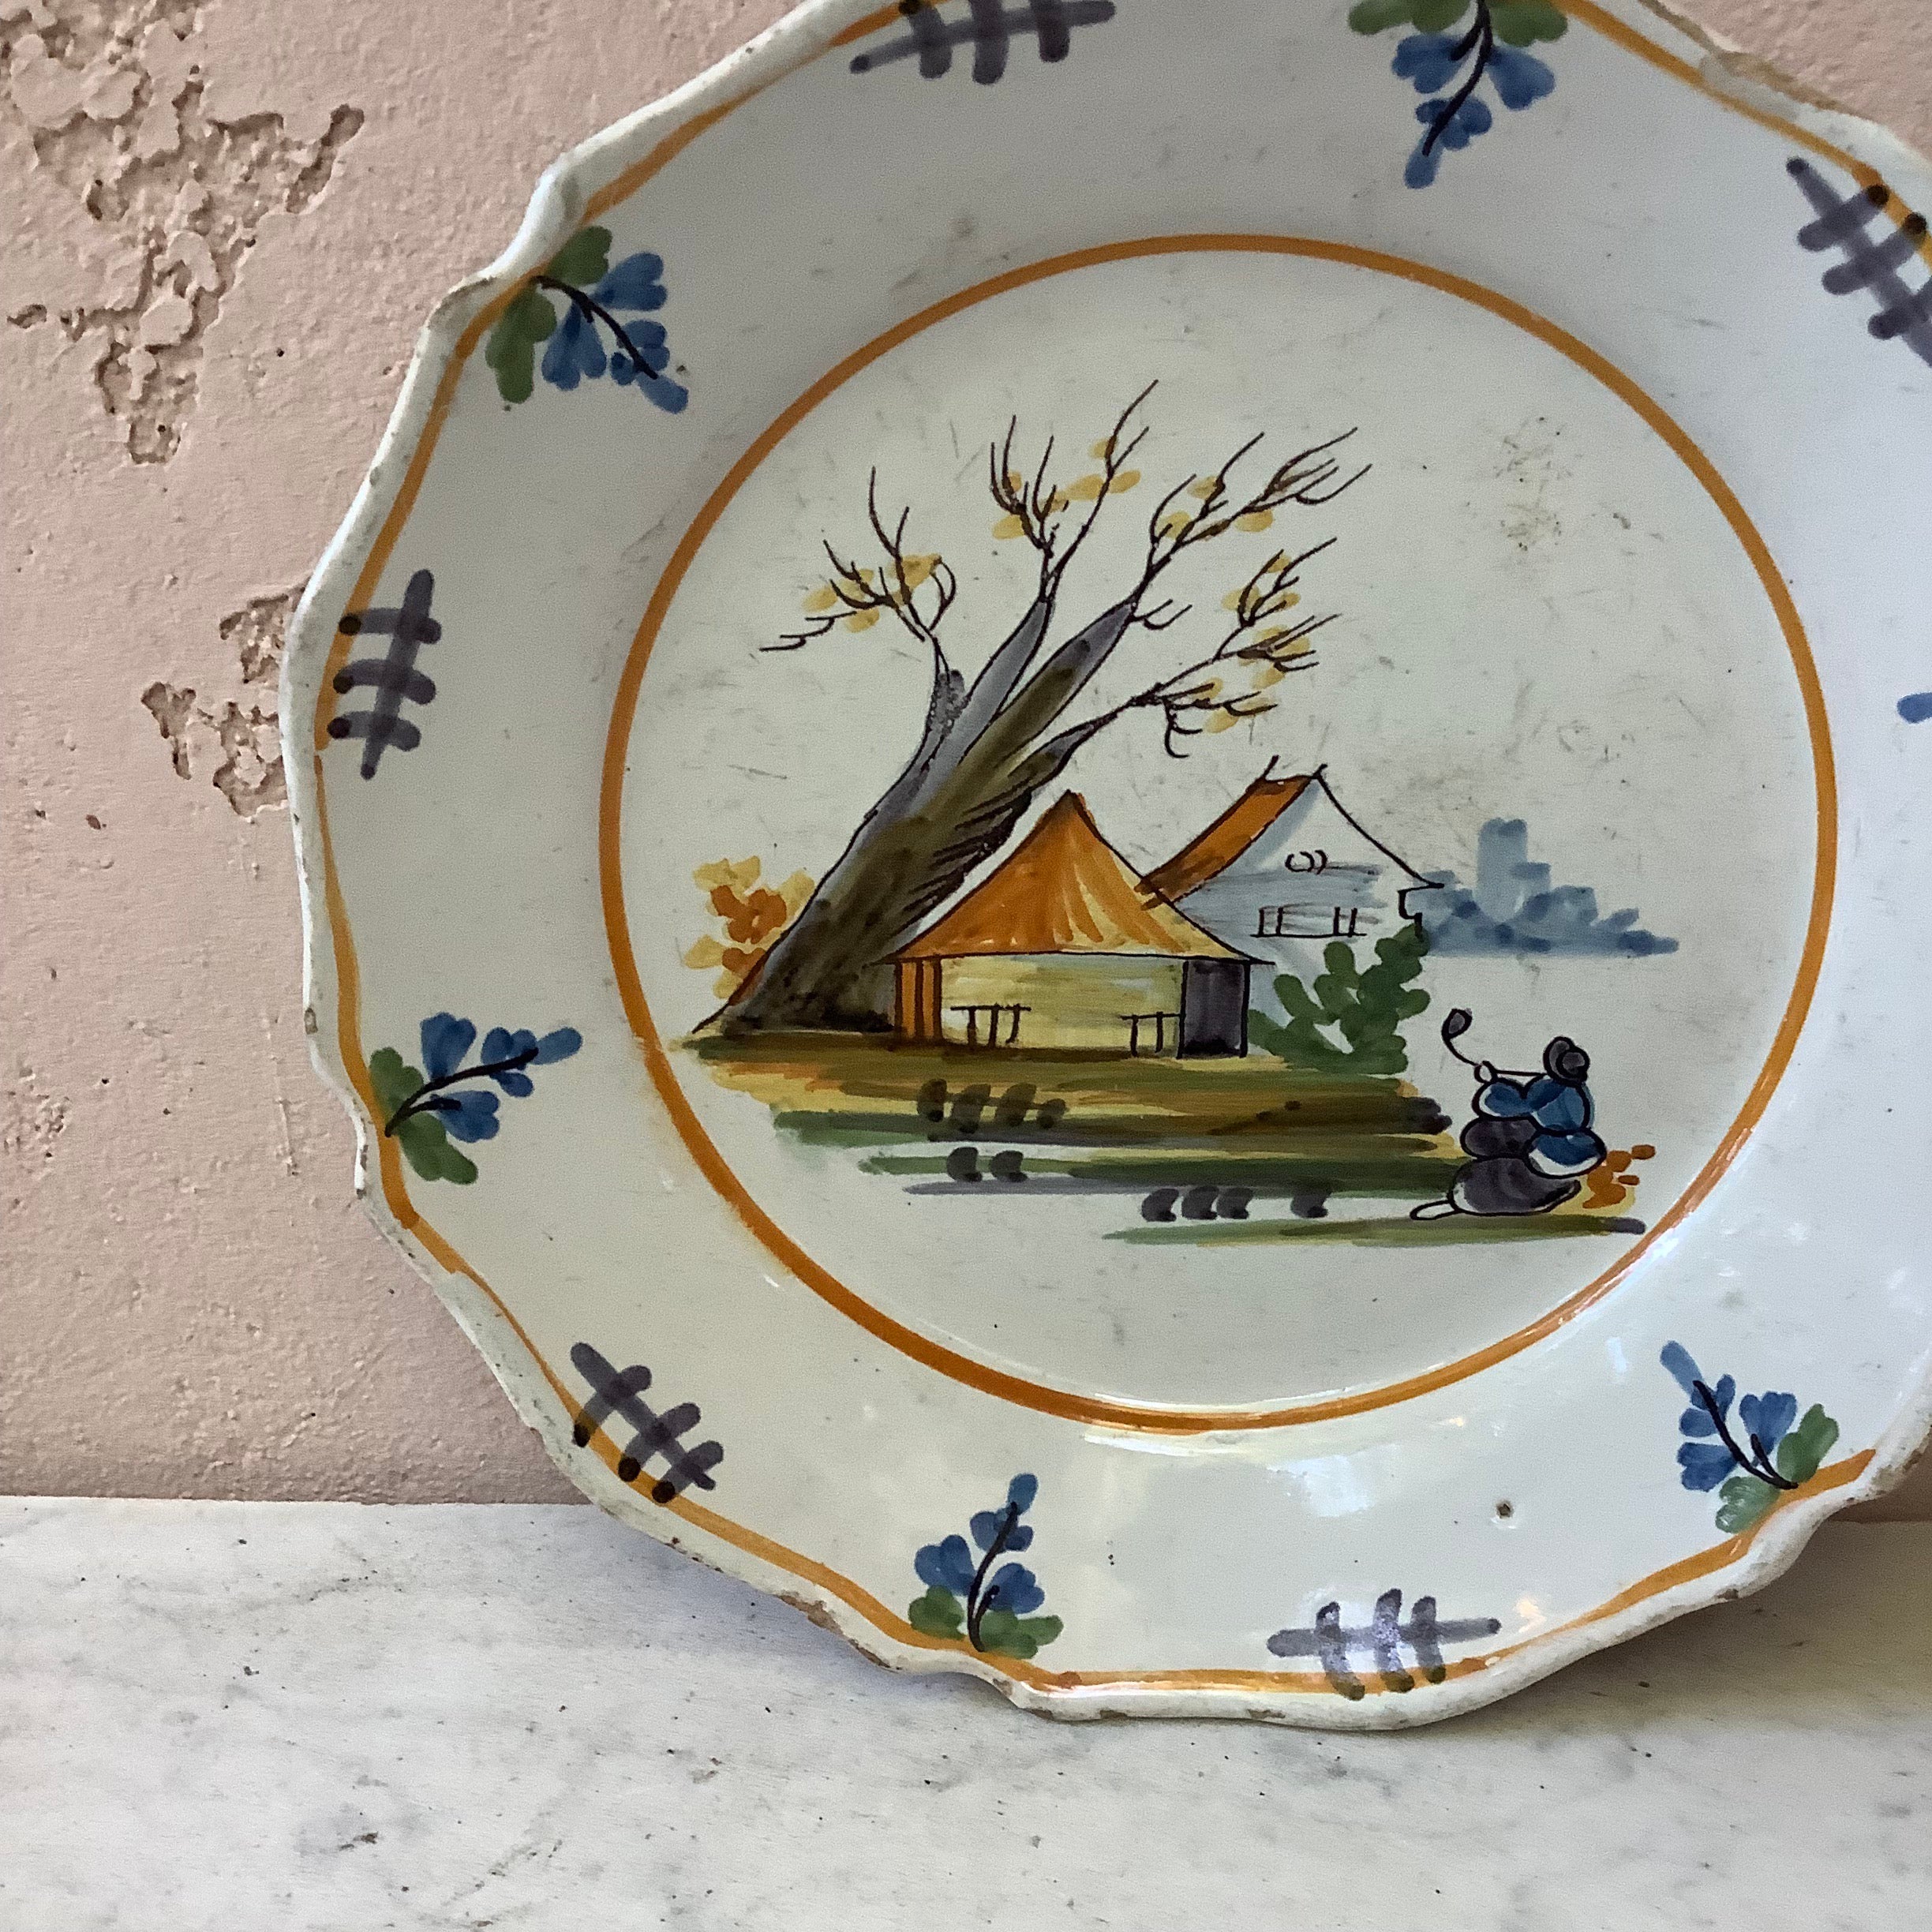 18th century French faience Nevers plate.
Houses with tree and a woman sitting.